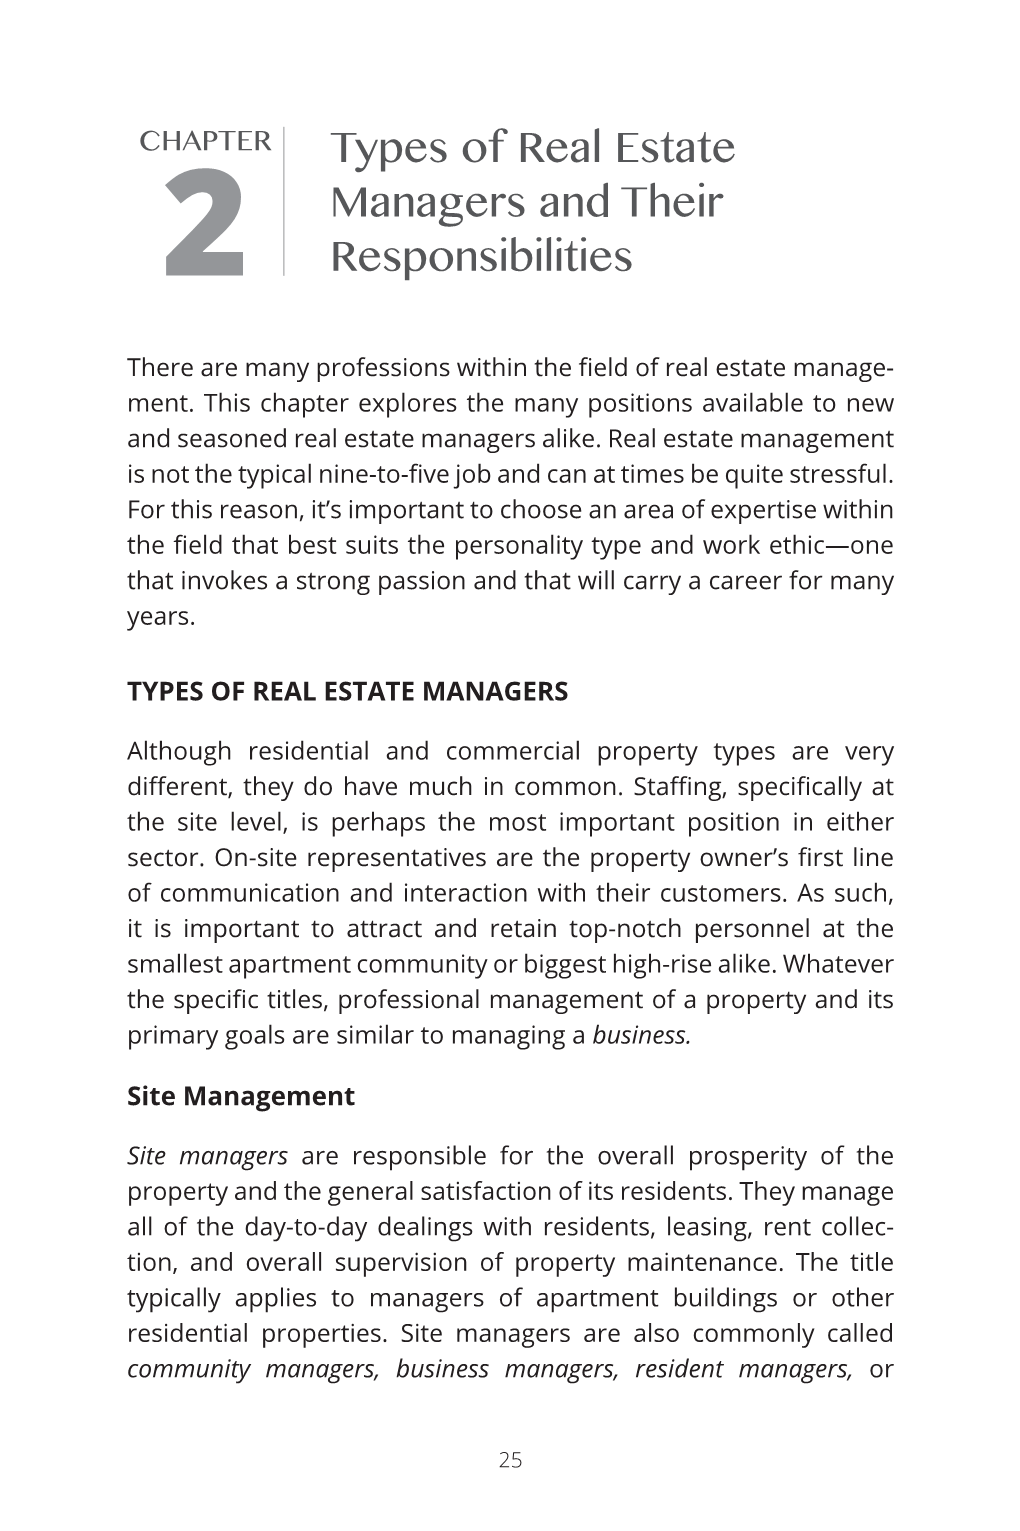 Types of Real Estate Managers and Their Responsibilities | 27 Operation of a Property and Gives the Manager More Time to Invest in Other Responsibilities